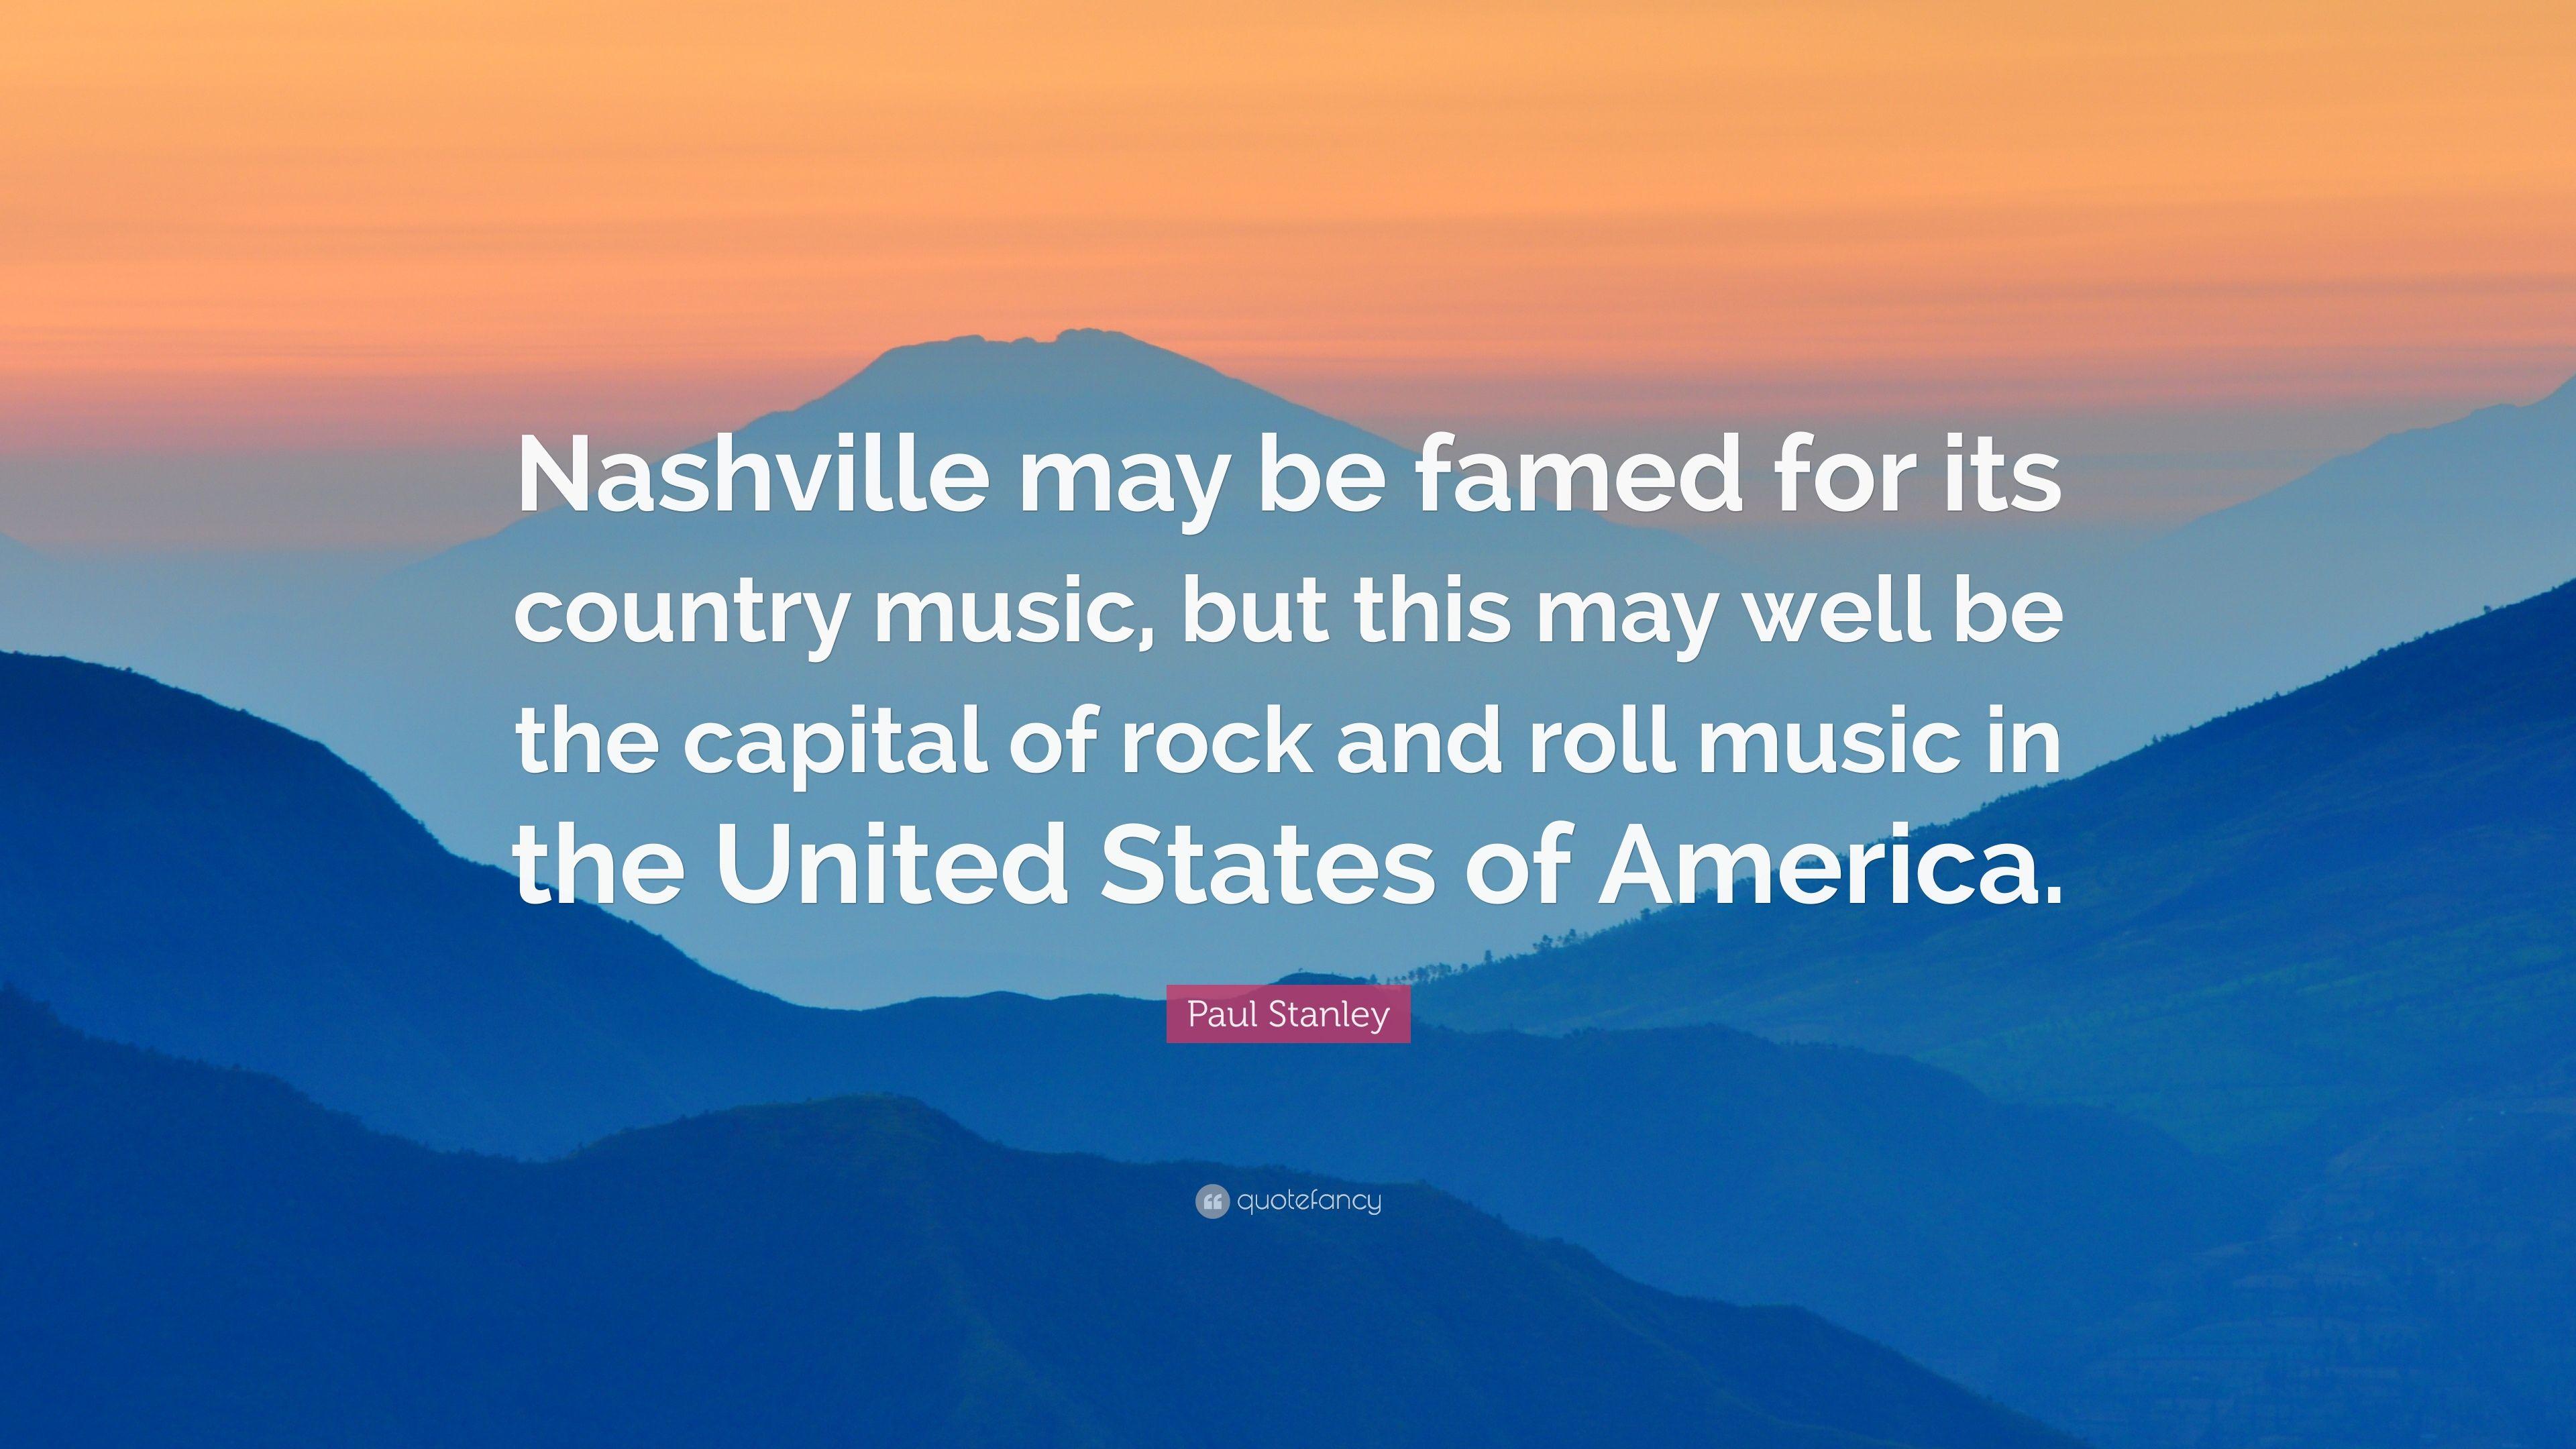 Paul Stanley Quote: “Nashville may be famed for its country music